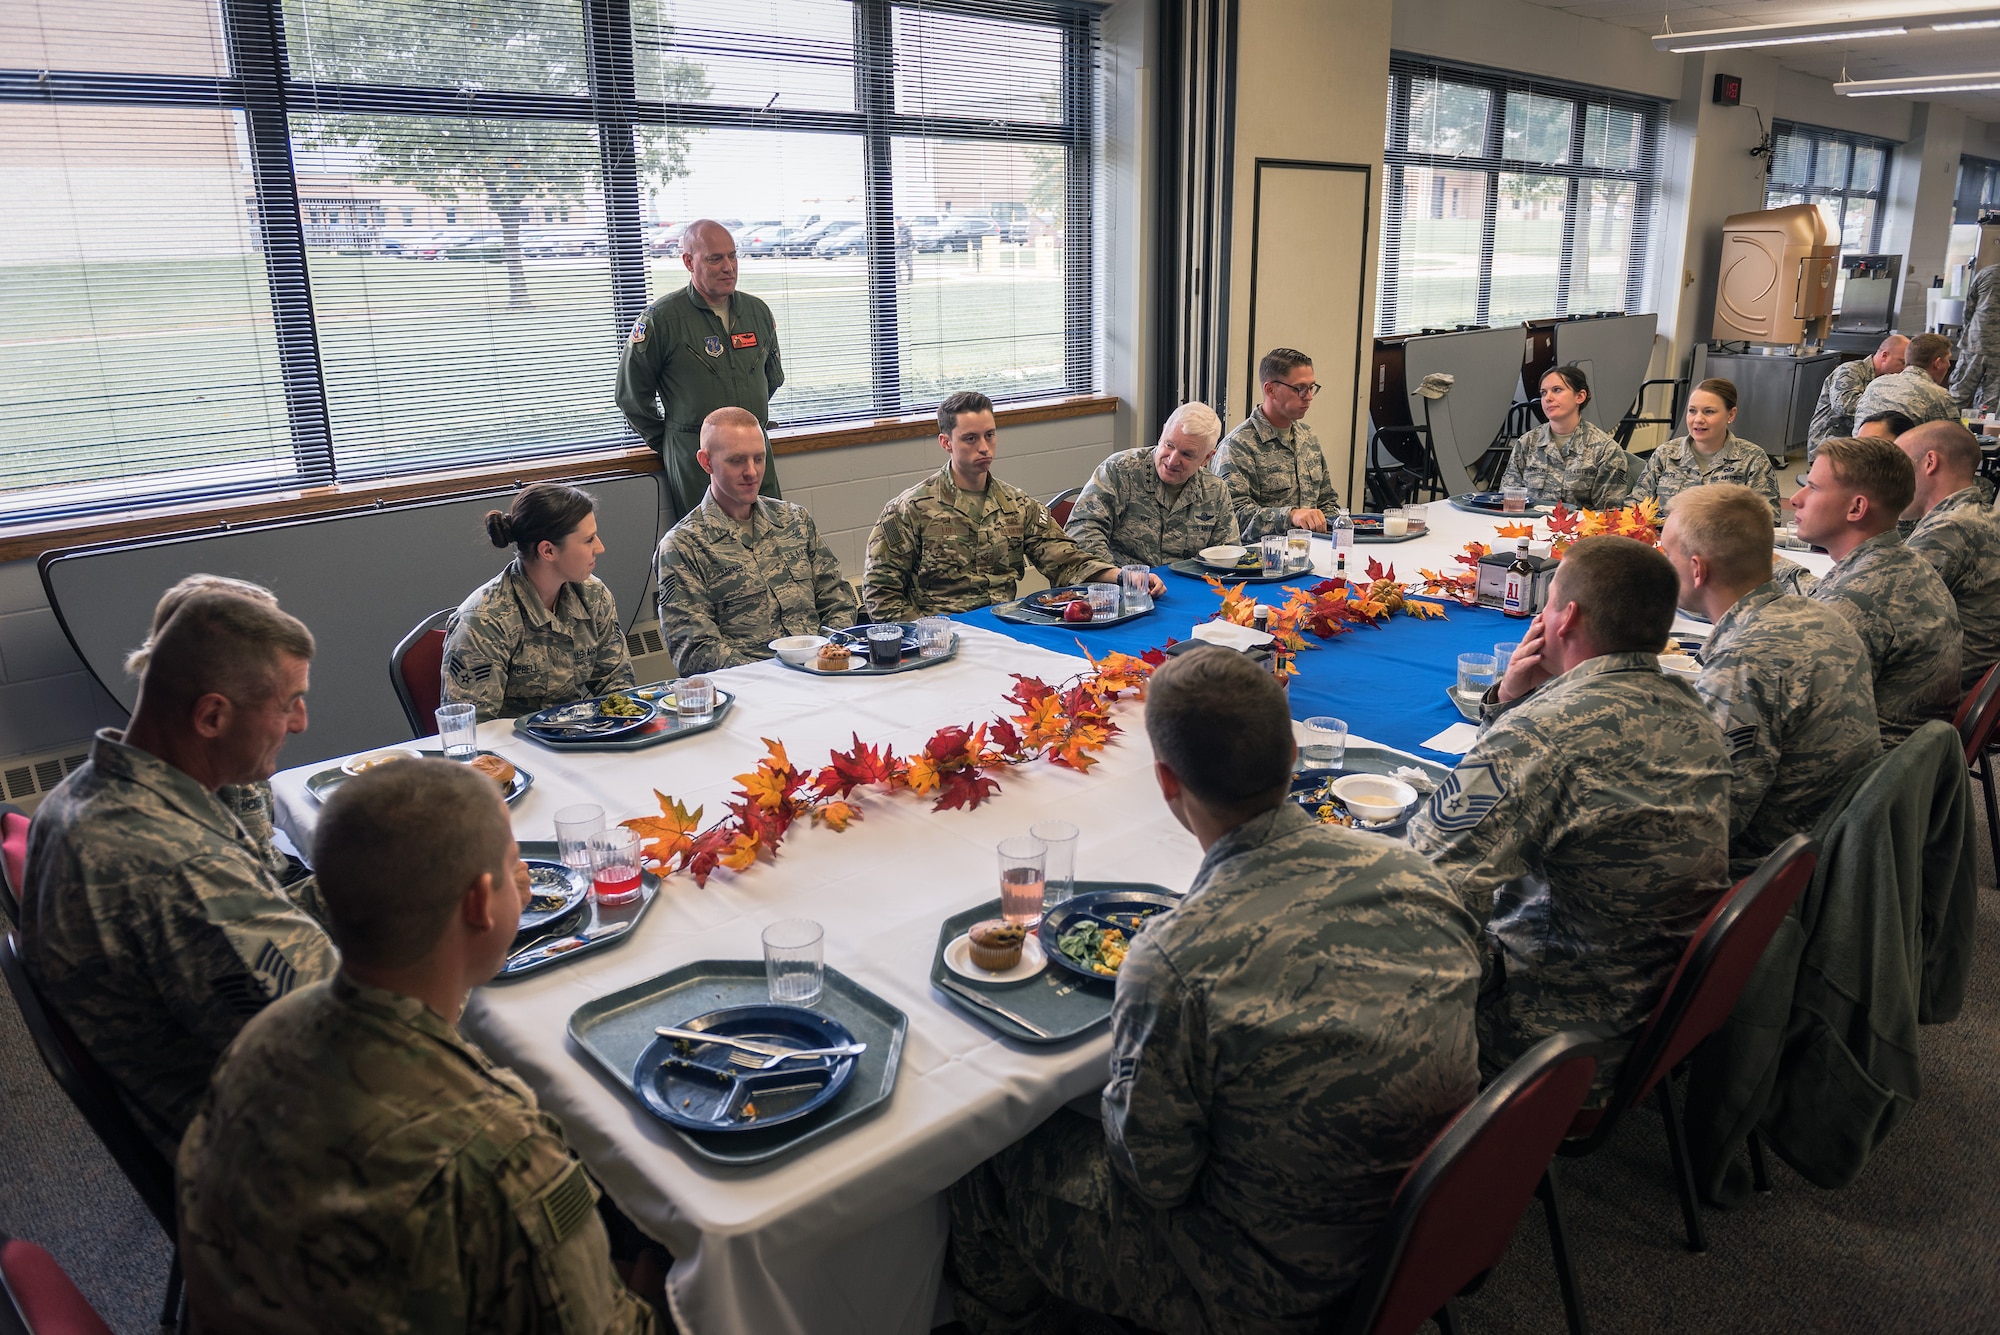 U.S. Air Force Lt. Gen. L. Scott Rice, the director of the Air National Guard, visits with Airmen at lunch during a visit to the 182nd Airlift Wing in Peoria, Ill., Oct. 14, 2018.